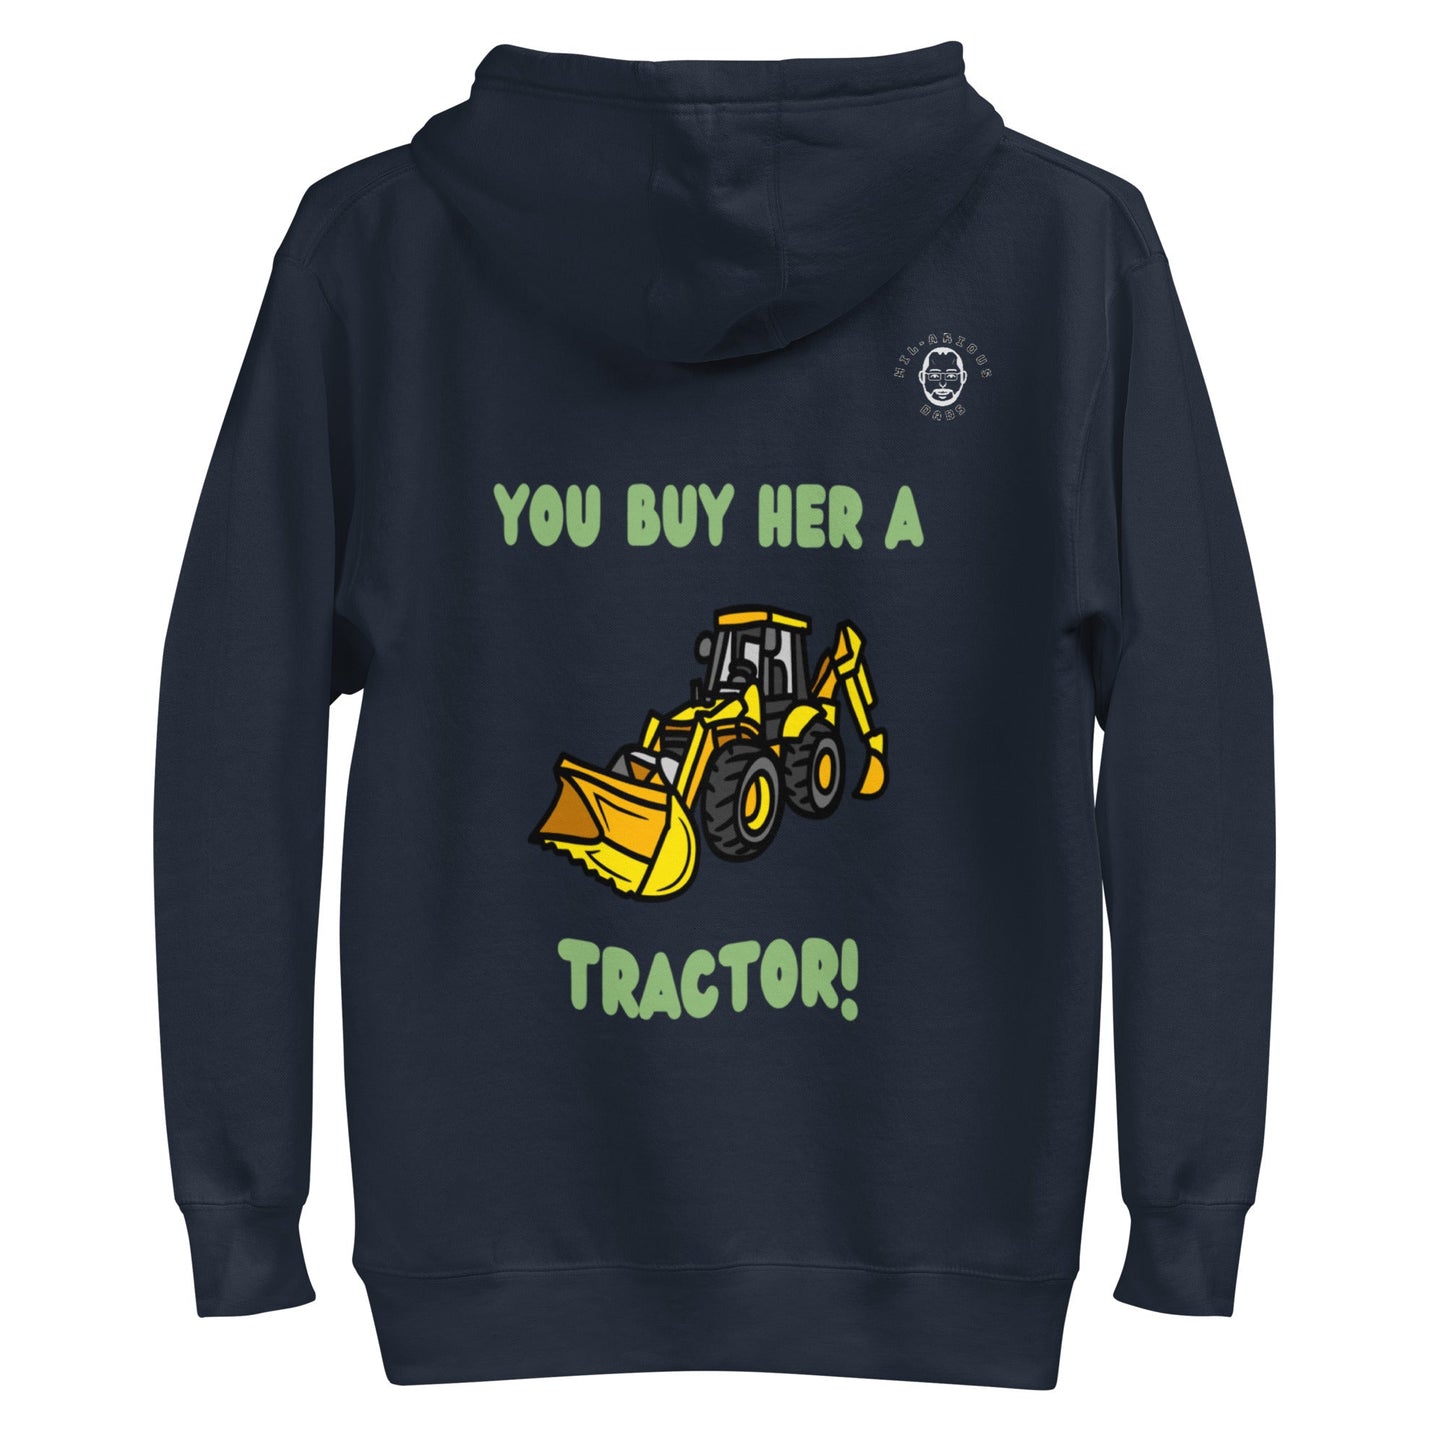 How do you get a country girl's attention?-Hoodie - Hil-arious Dads